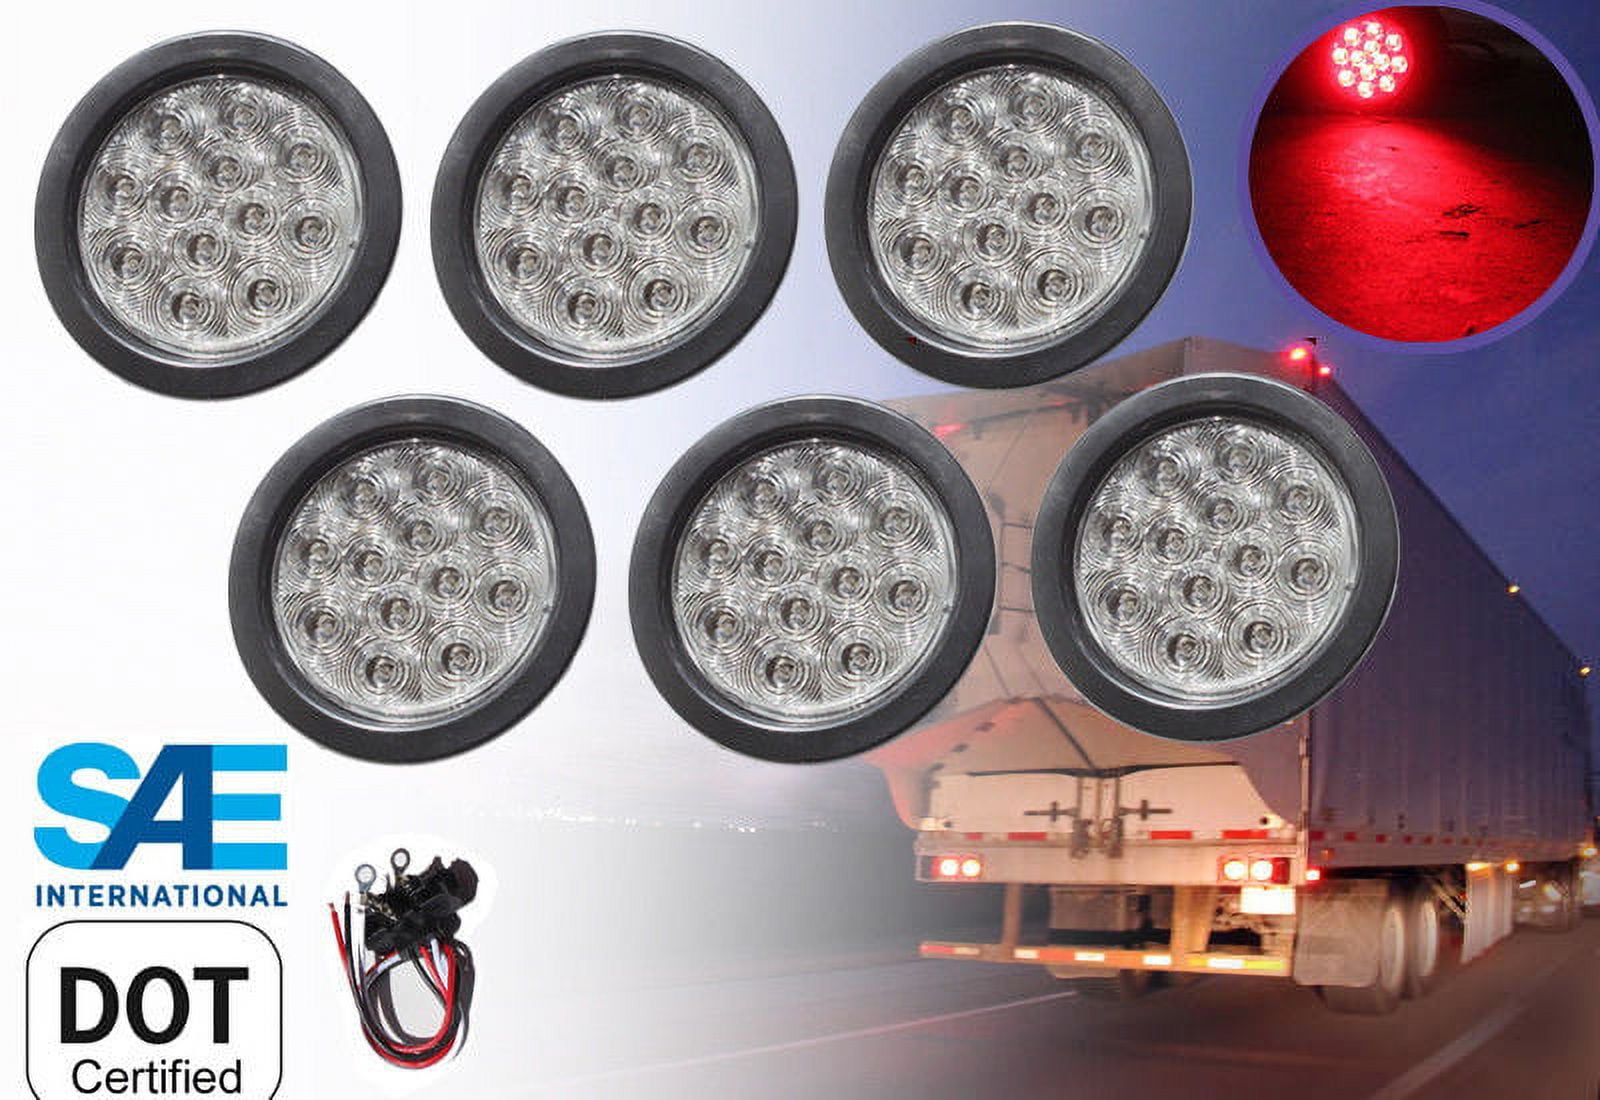 XXXXX 6 Pieces 4 Clear Lens Round Red LED Light Brake Stop Turn Tail  Signal w Grommet Pigtail Kit for Truck Trailer Tractor Jeep DOT SAE  Approved - D - Walmart.com